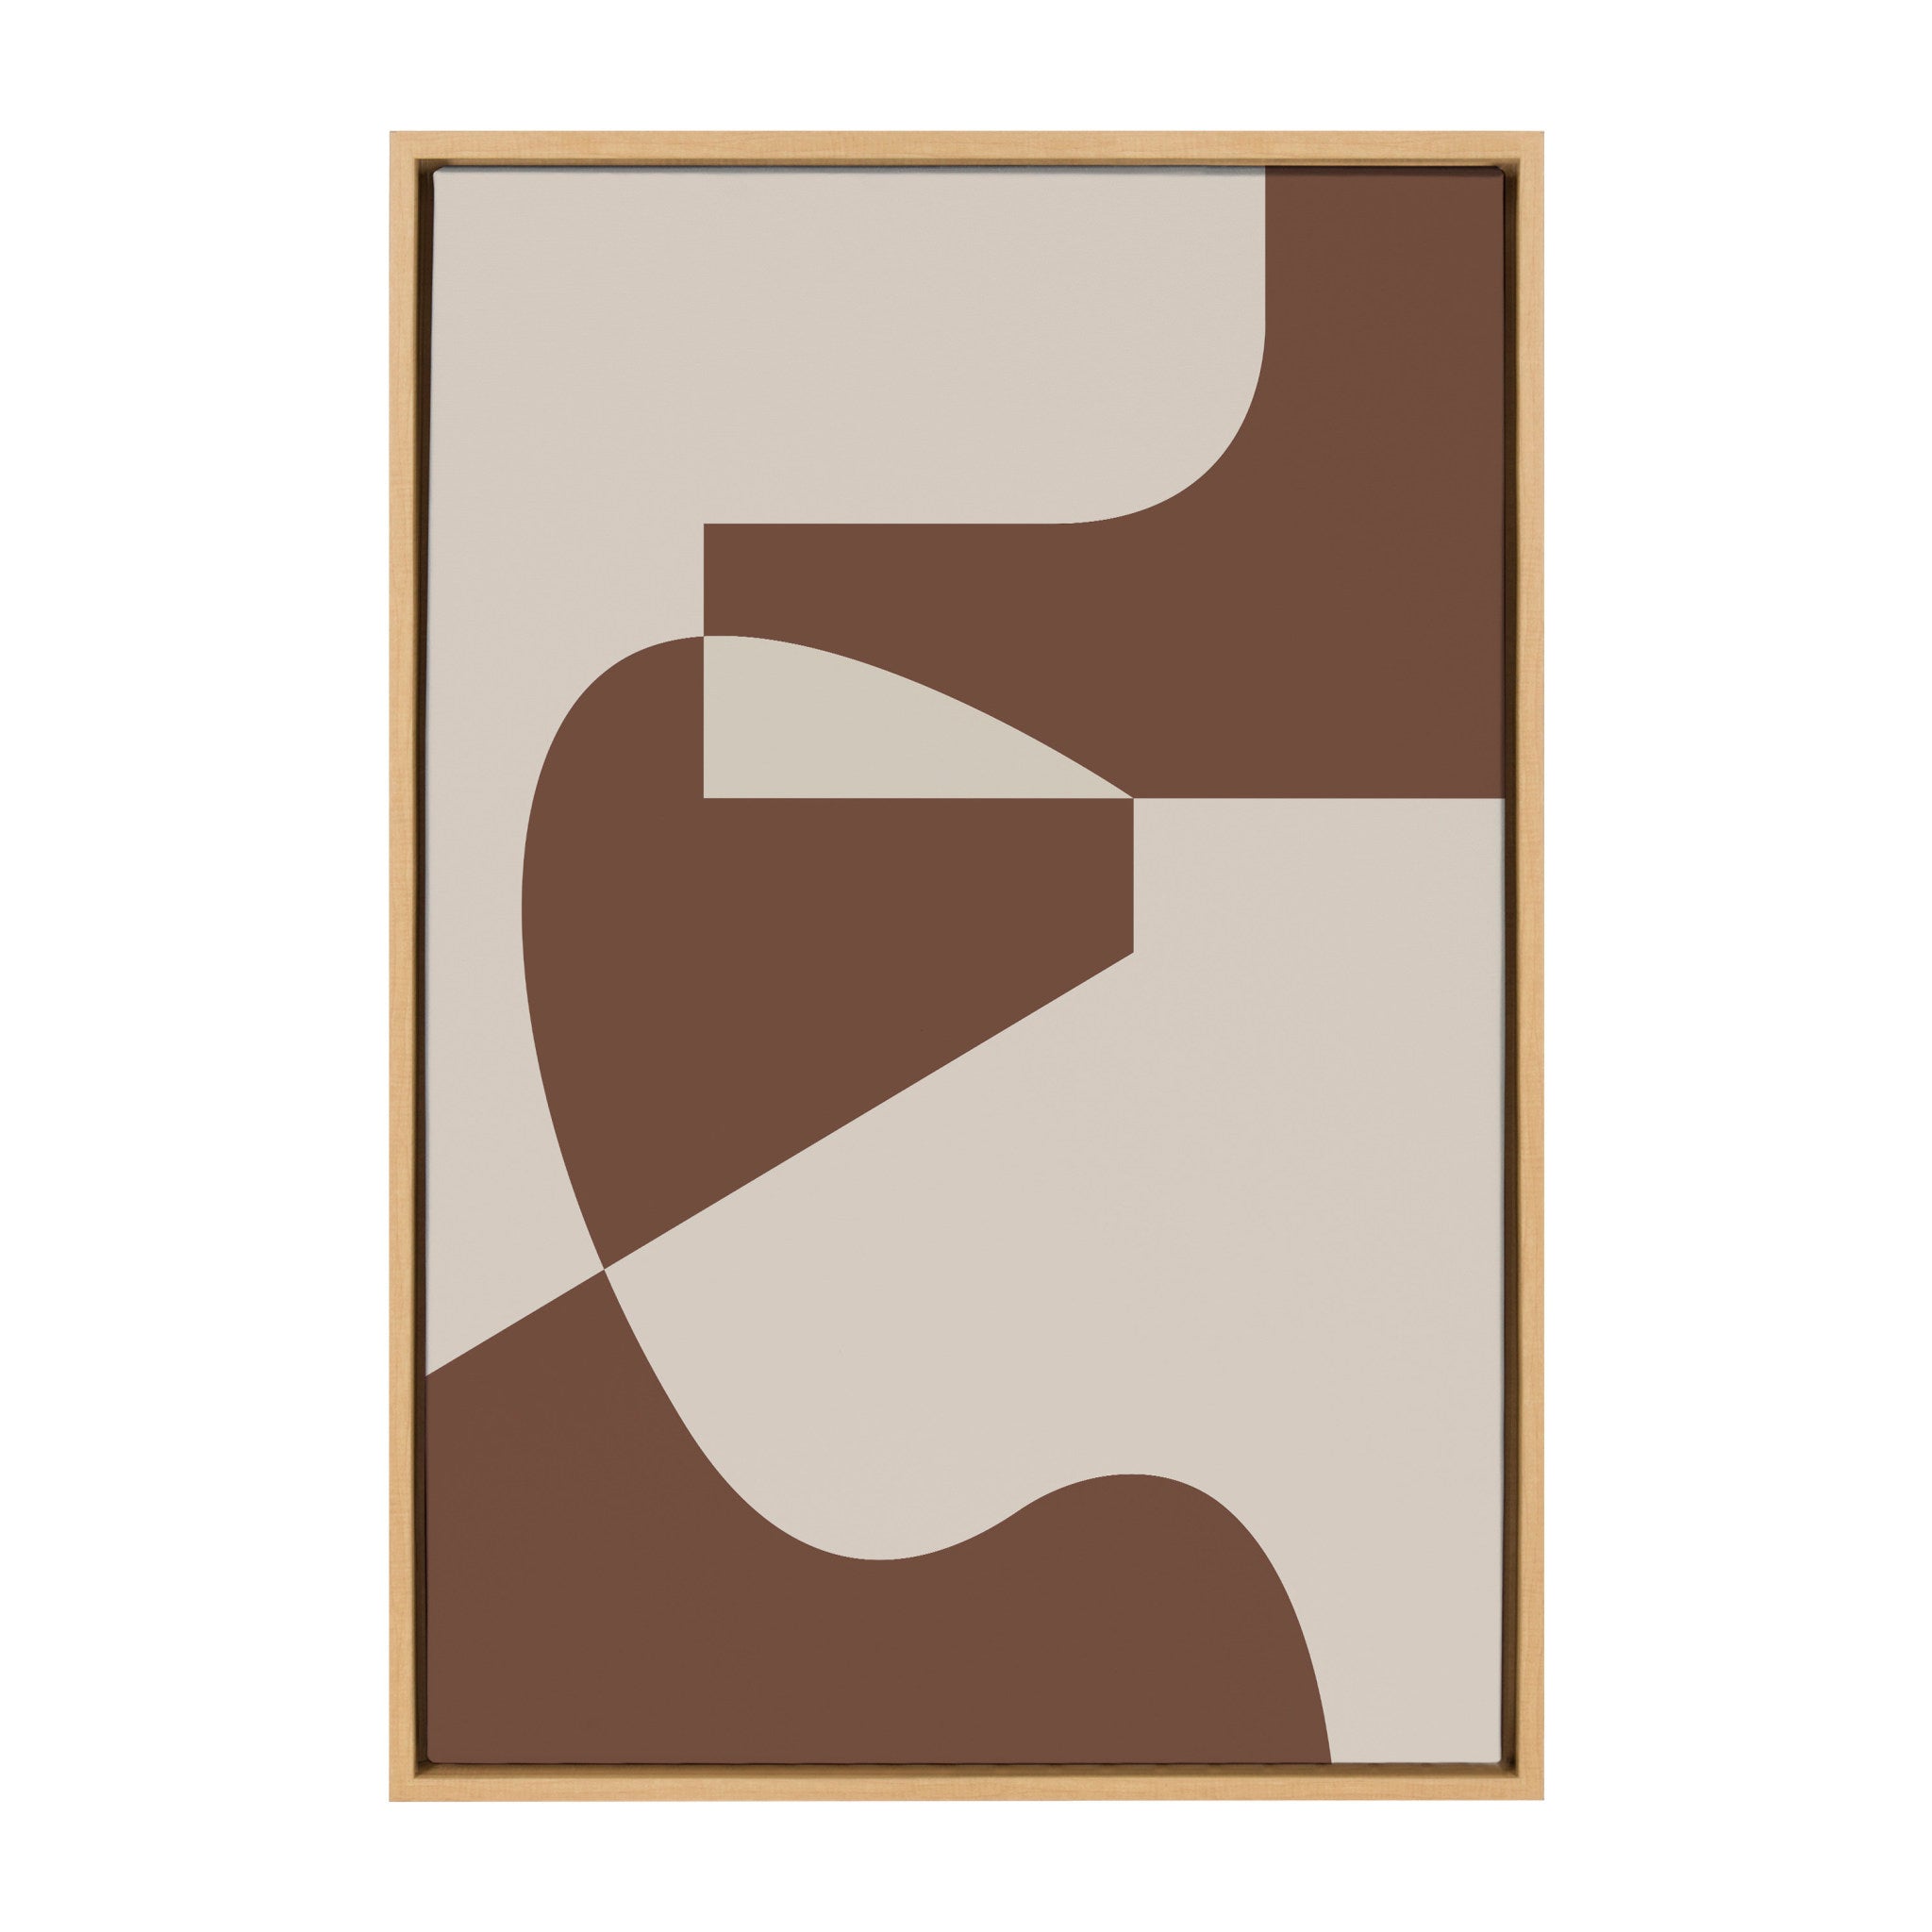 Sylvie Eye Catching Sleek Abstract 4 Brown and Beige Framed Canvas by The Creative Bunch Studio